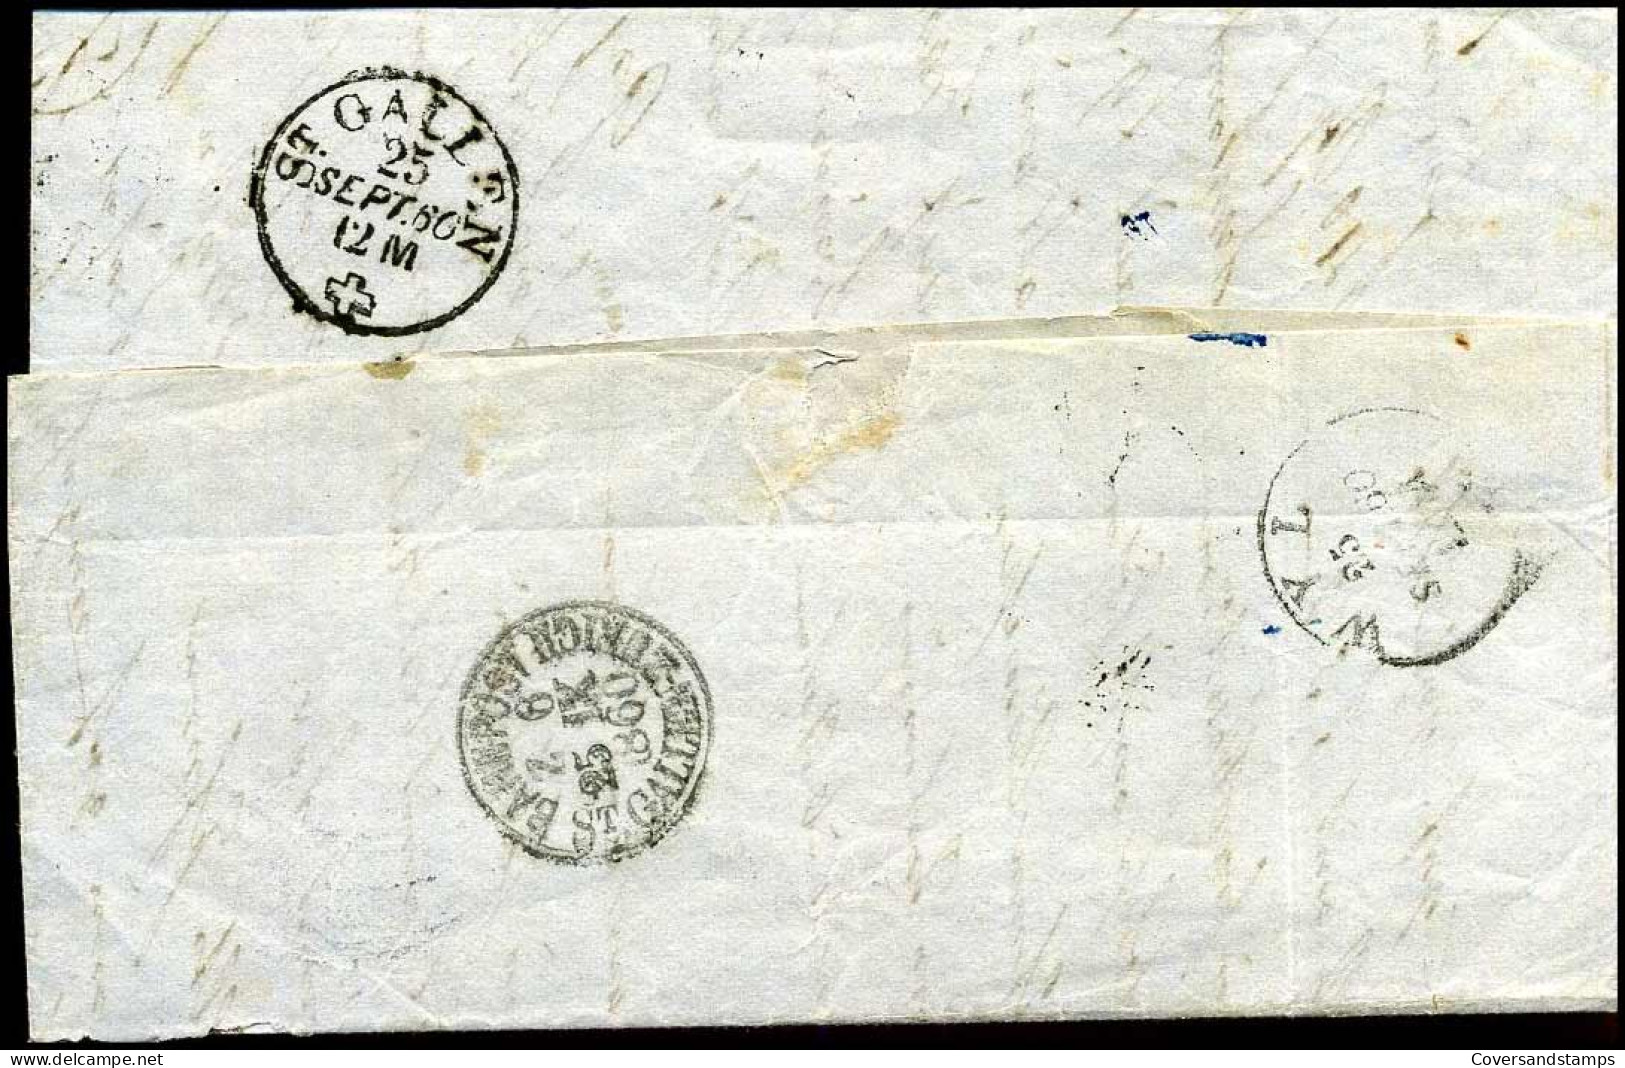 Cover From Constanz To St Gallen - 1860 - ...-1845 Prephilately